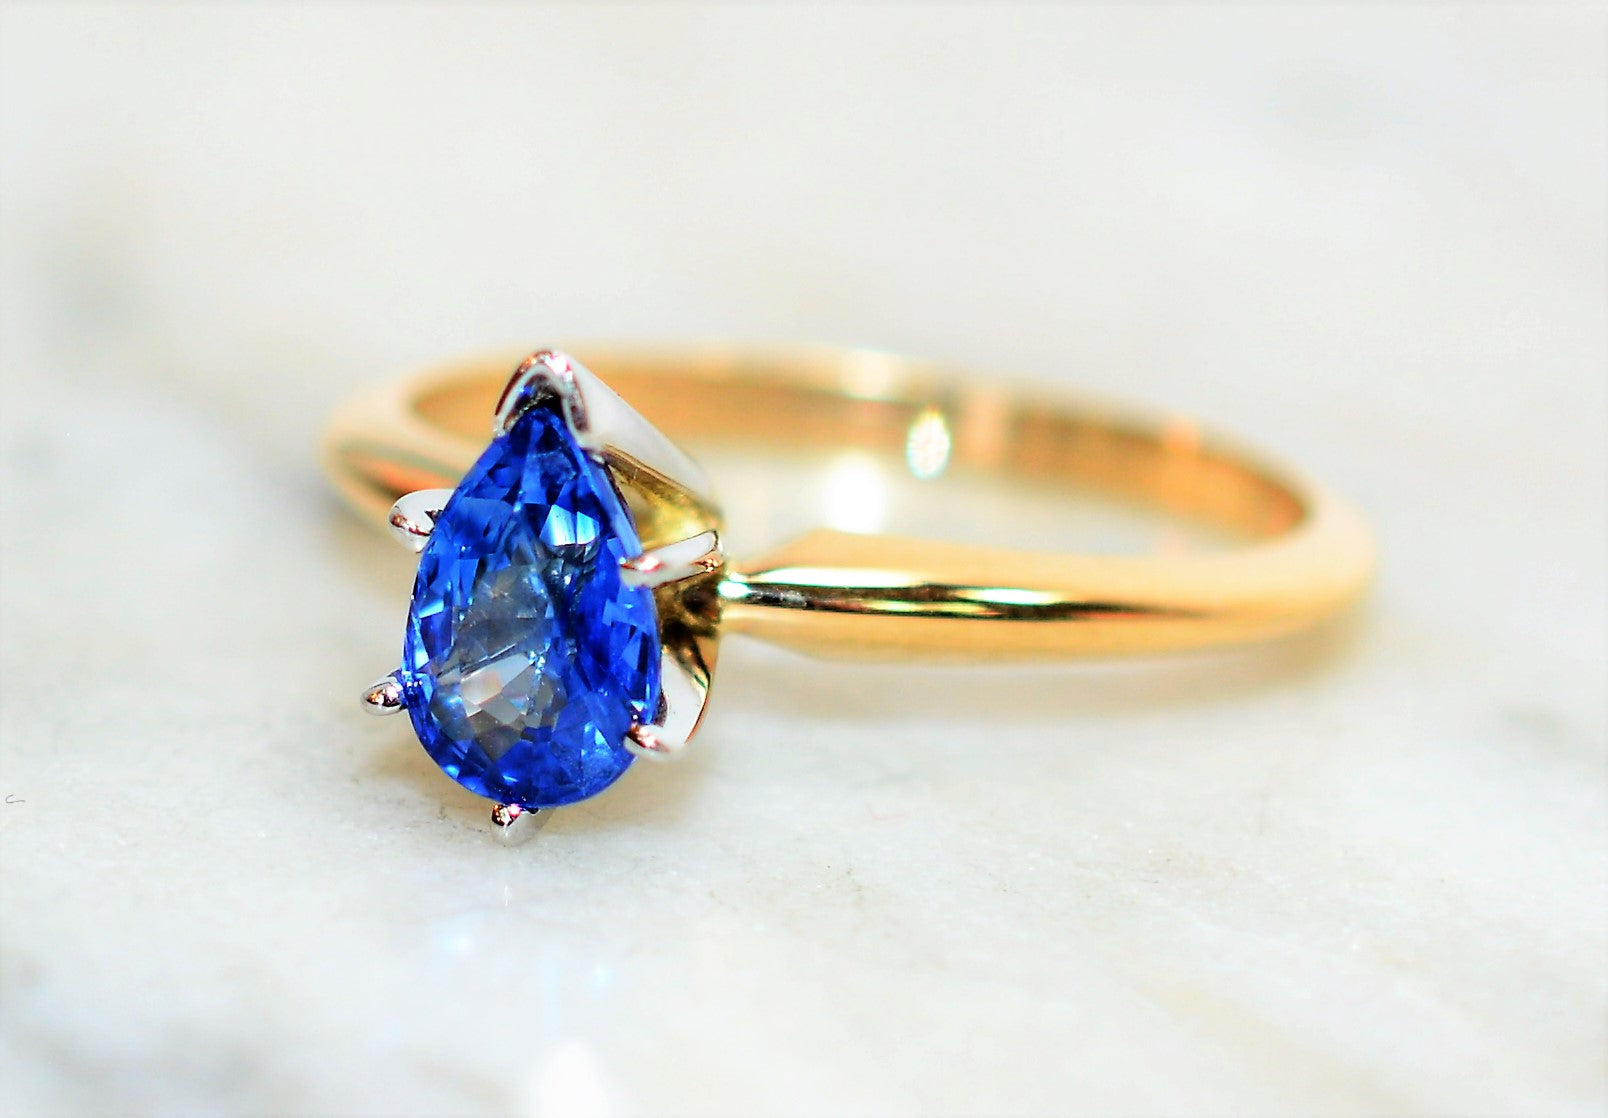 Natural Ceylon Sapphire Ring 14K Solid Gold .85ct Sri Lankan Sapphire Ring Solitaire Ring Engagement Ring Bridal Jewelry Wedding Ring Promise